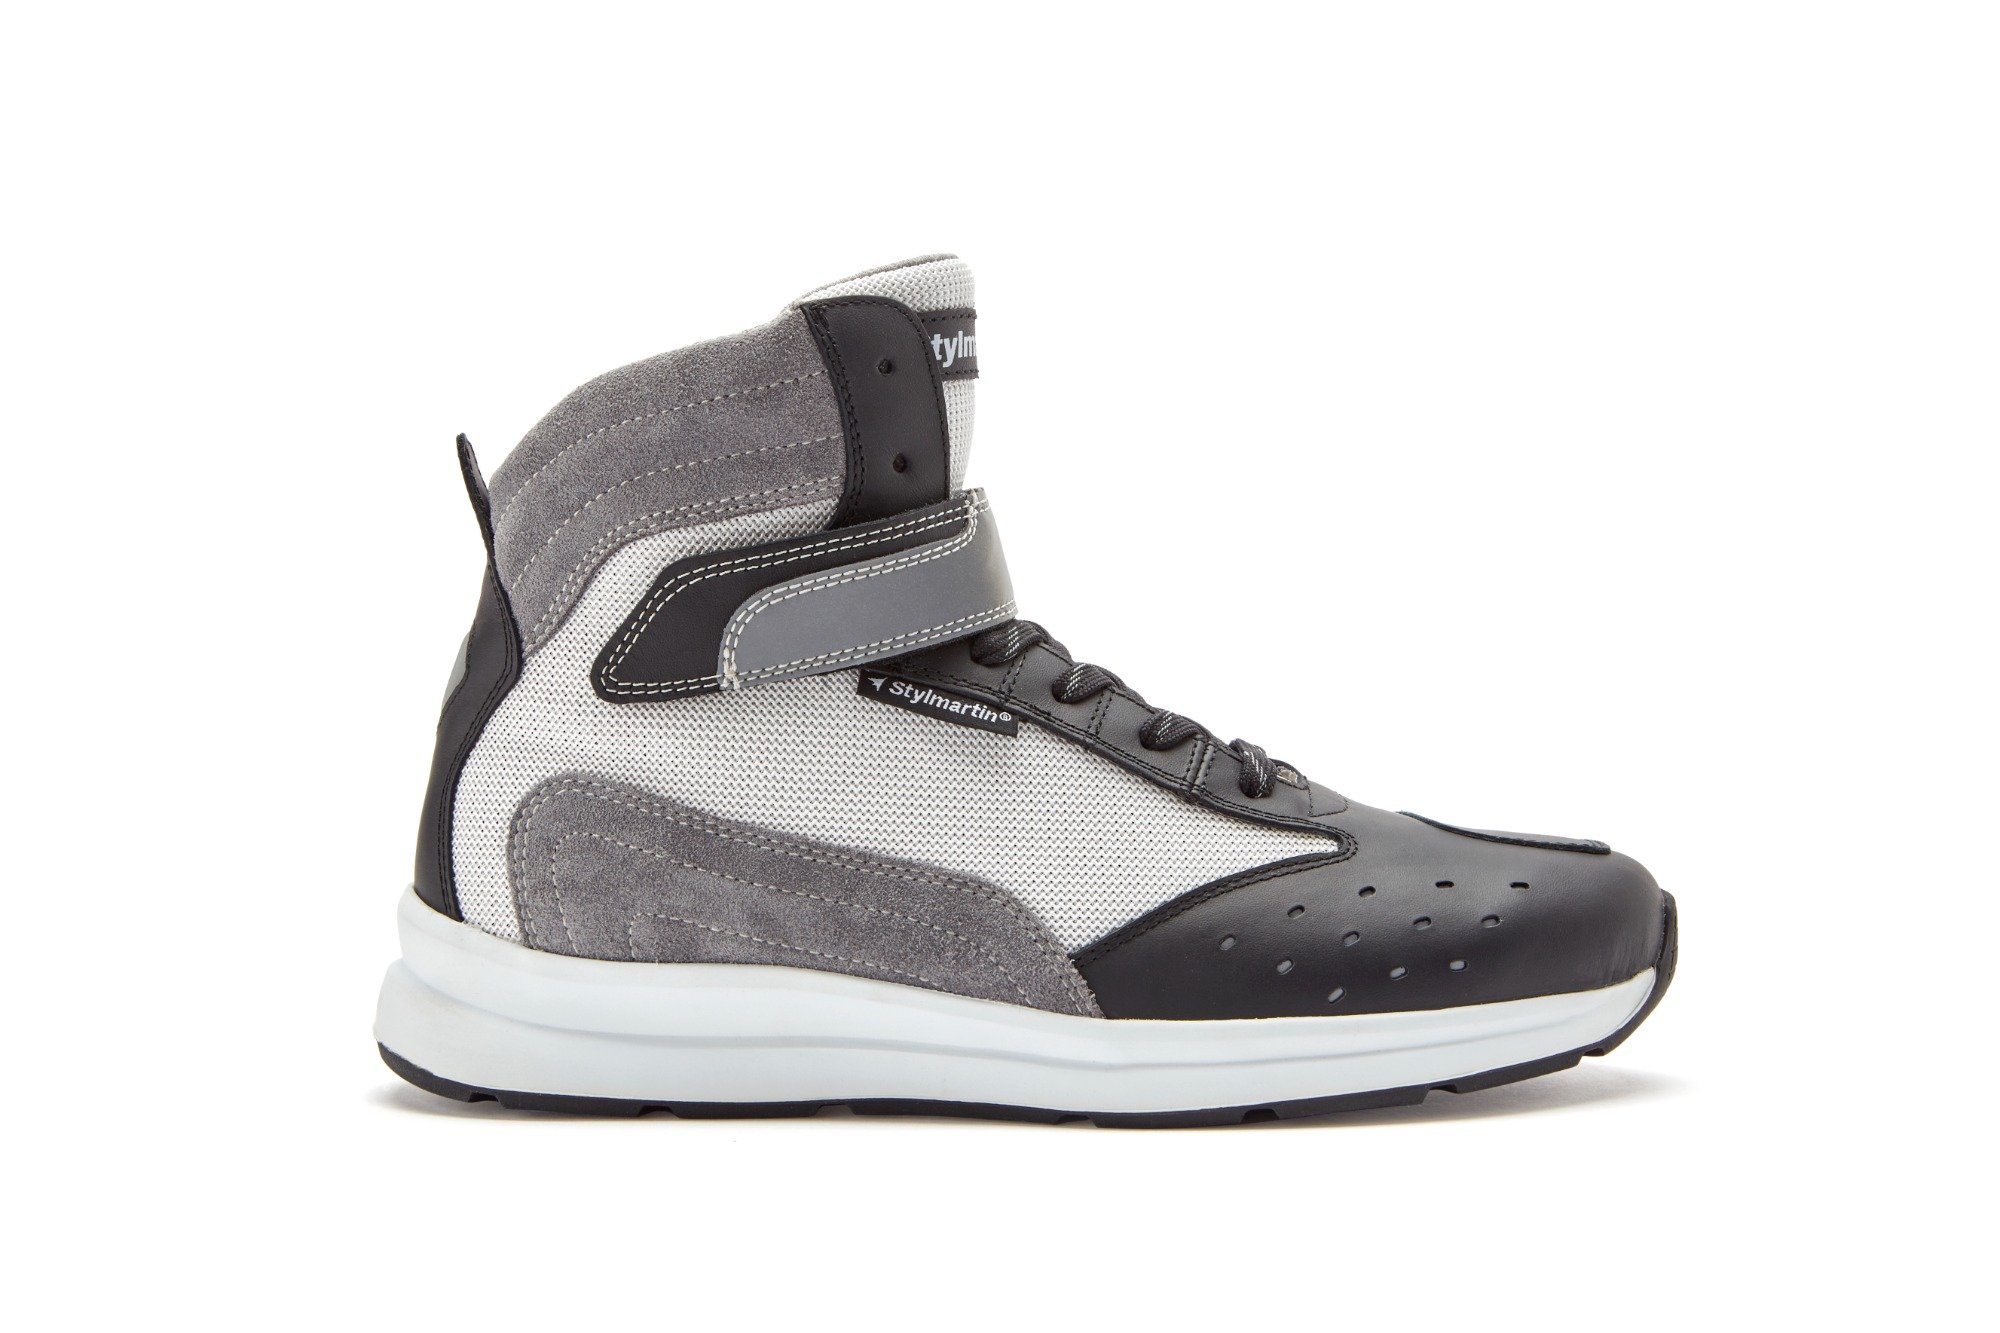 Image of Stylmartin Audax Air Black Anthracite White Size 36 ID 1000001309286